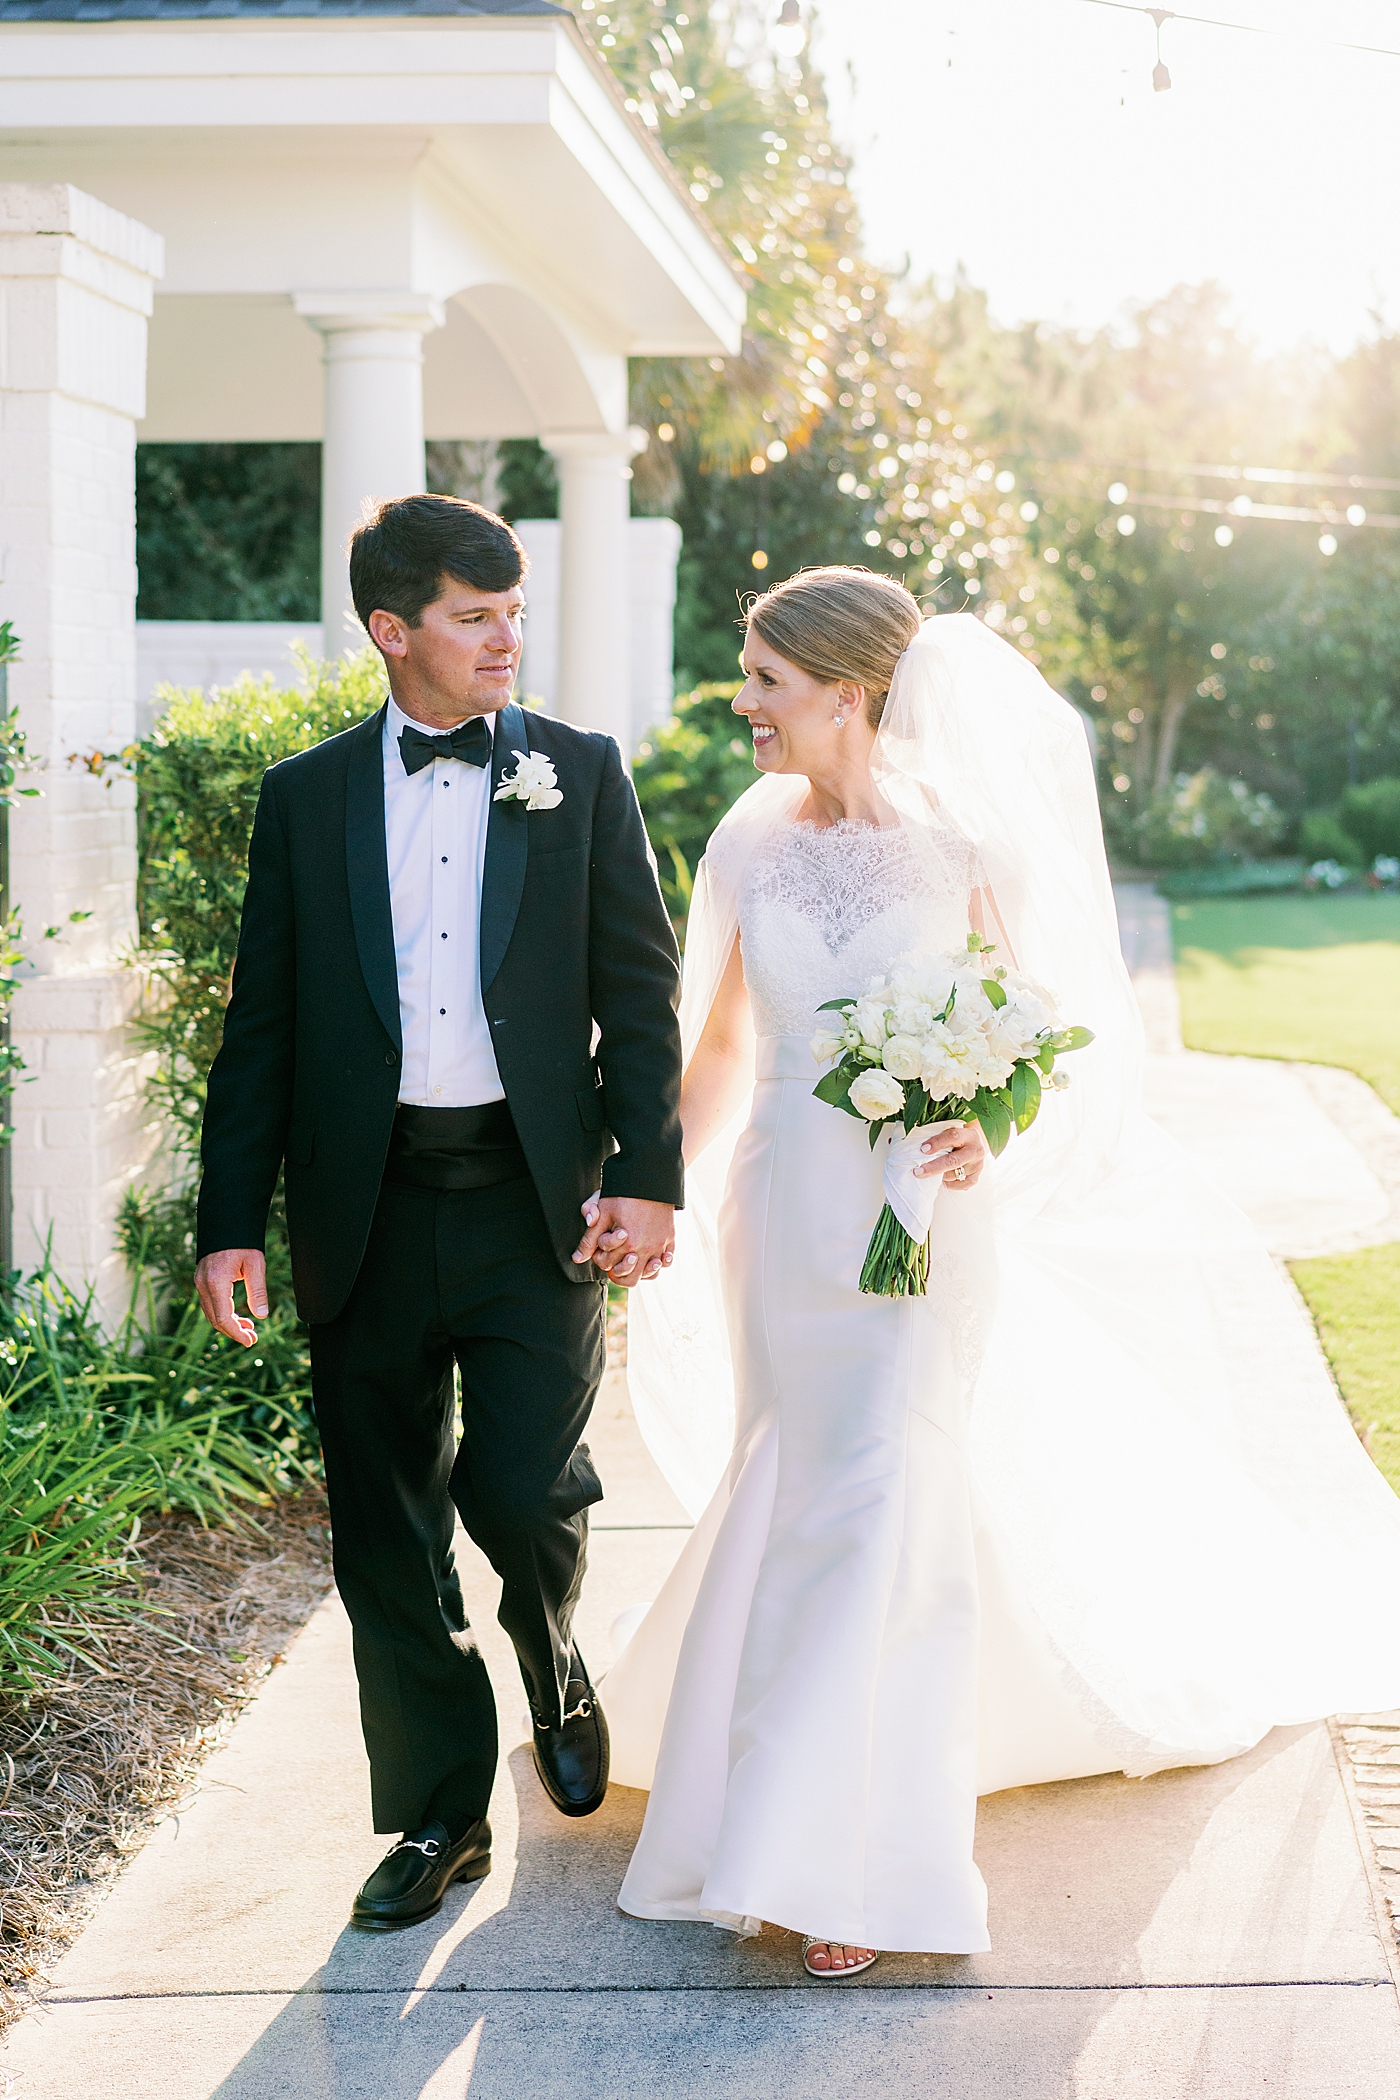 Bride and groom walking hand in hand at sunset | Image by Annie Laura Photo